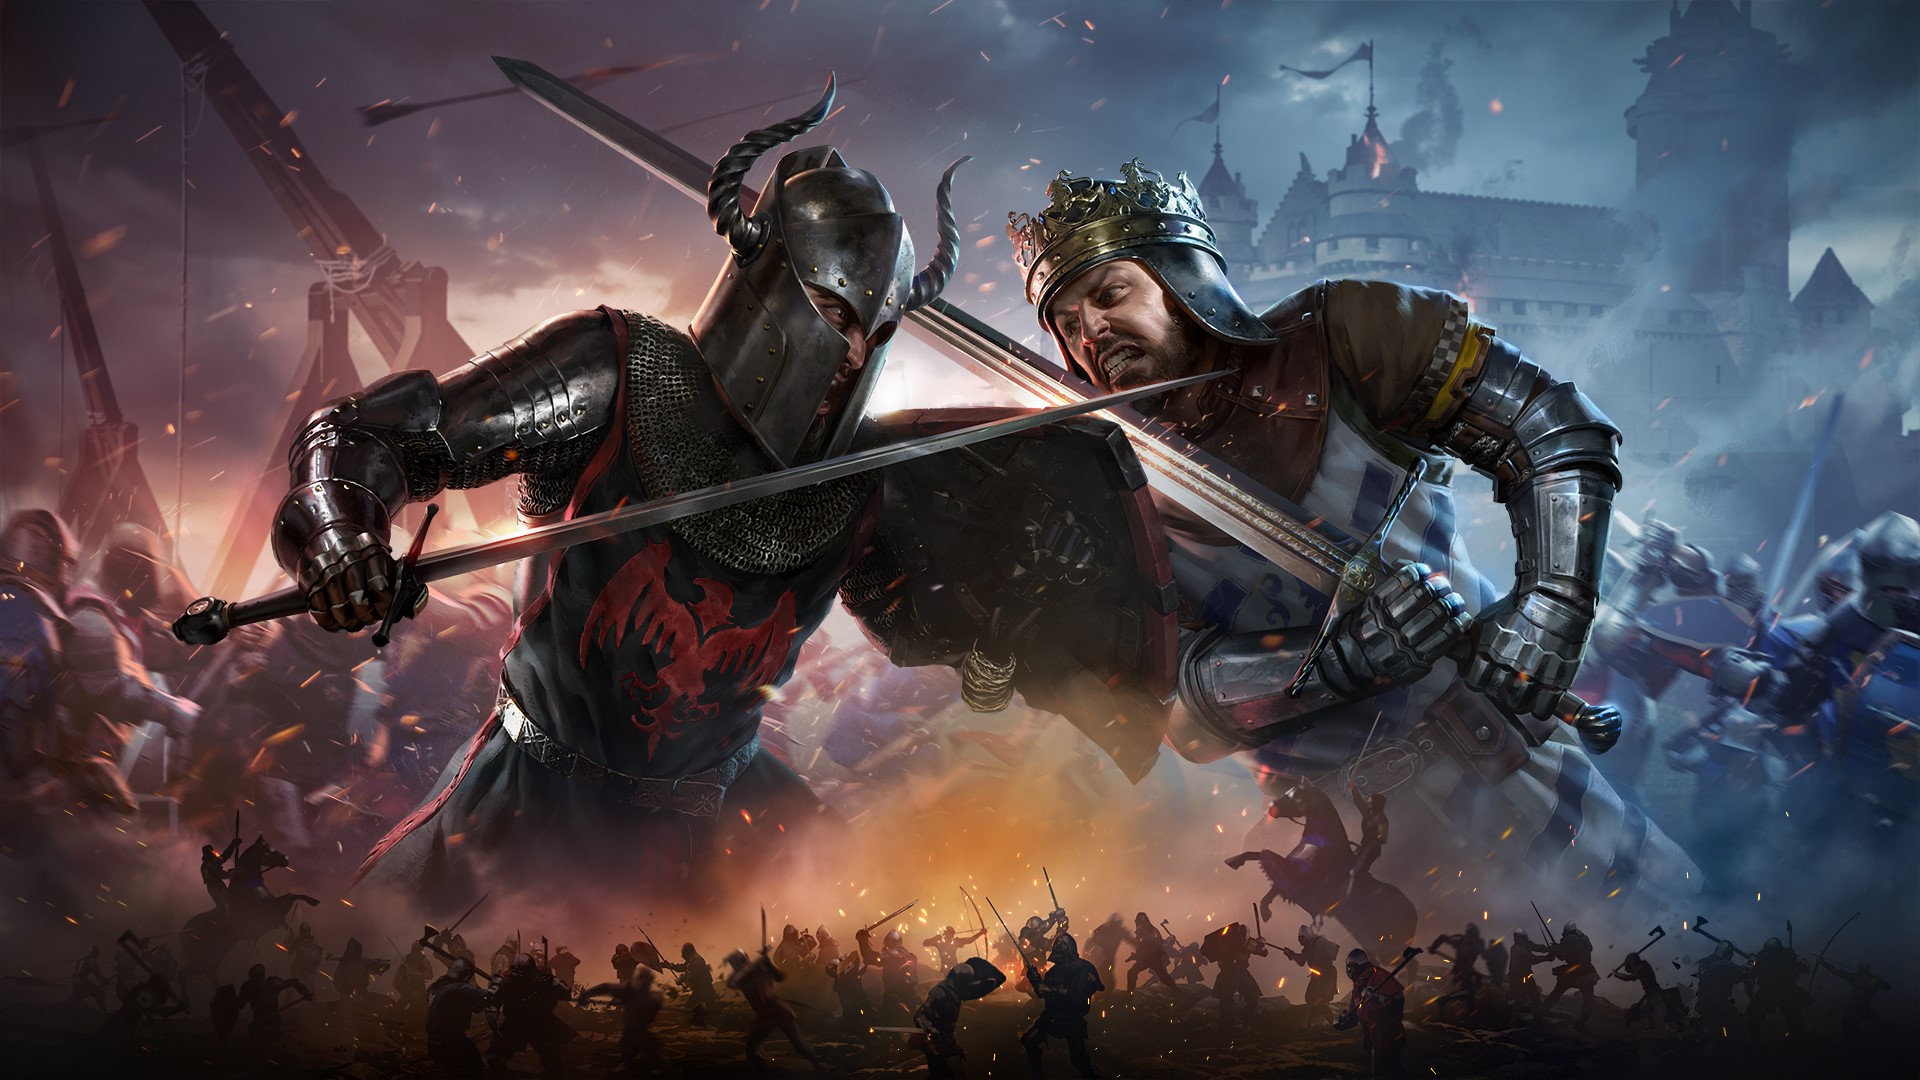 Chivalry 2 adds 500,000 new players following Game Pass debut